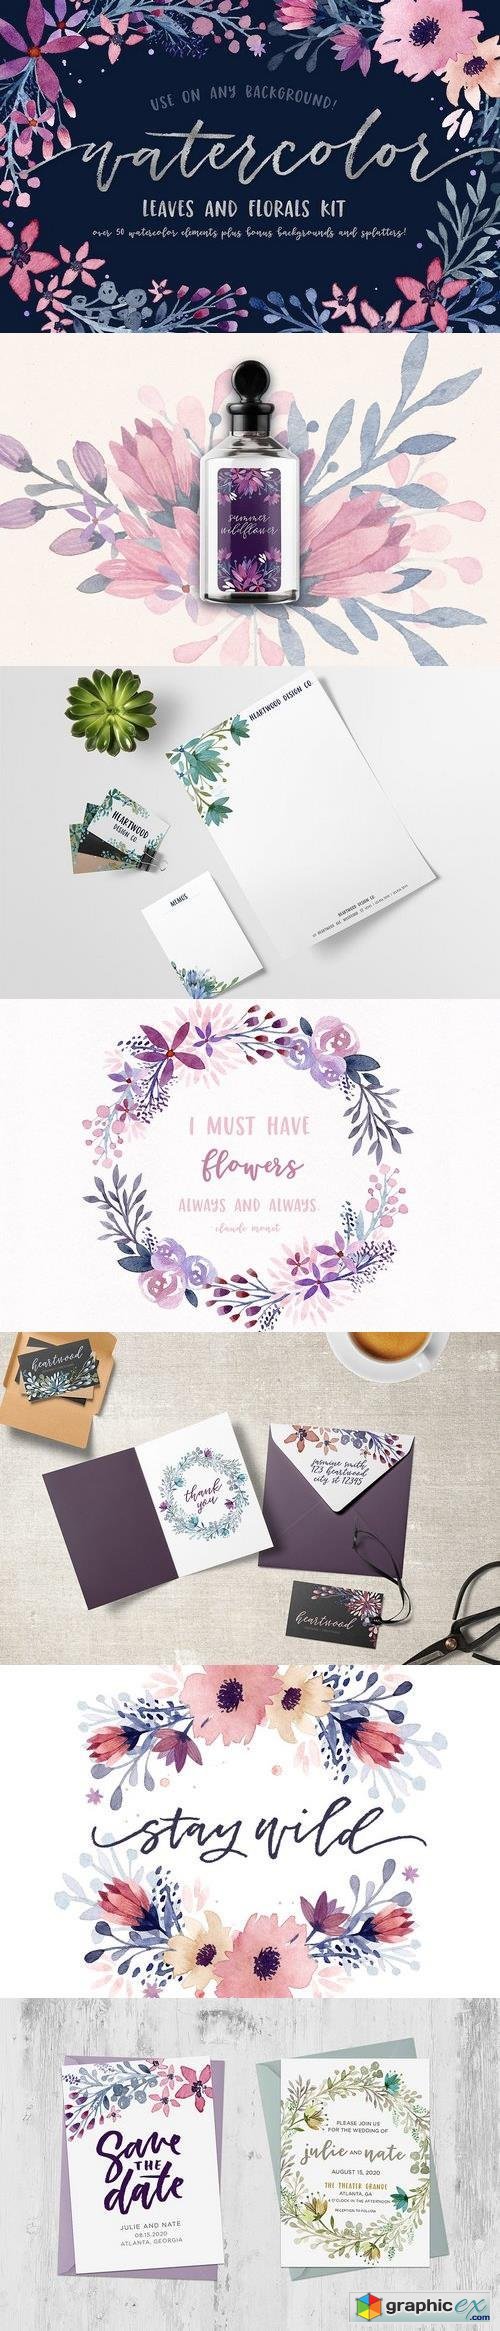 Watercolor Leaves and Florals Kit